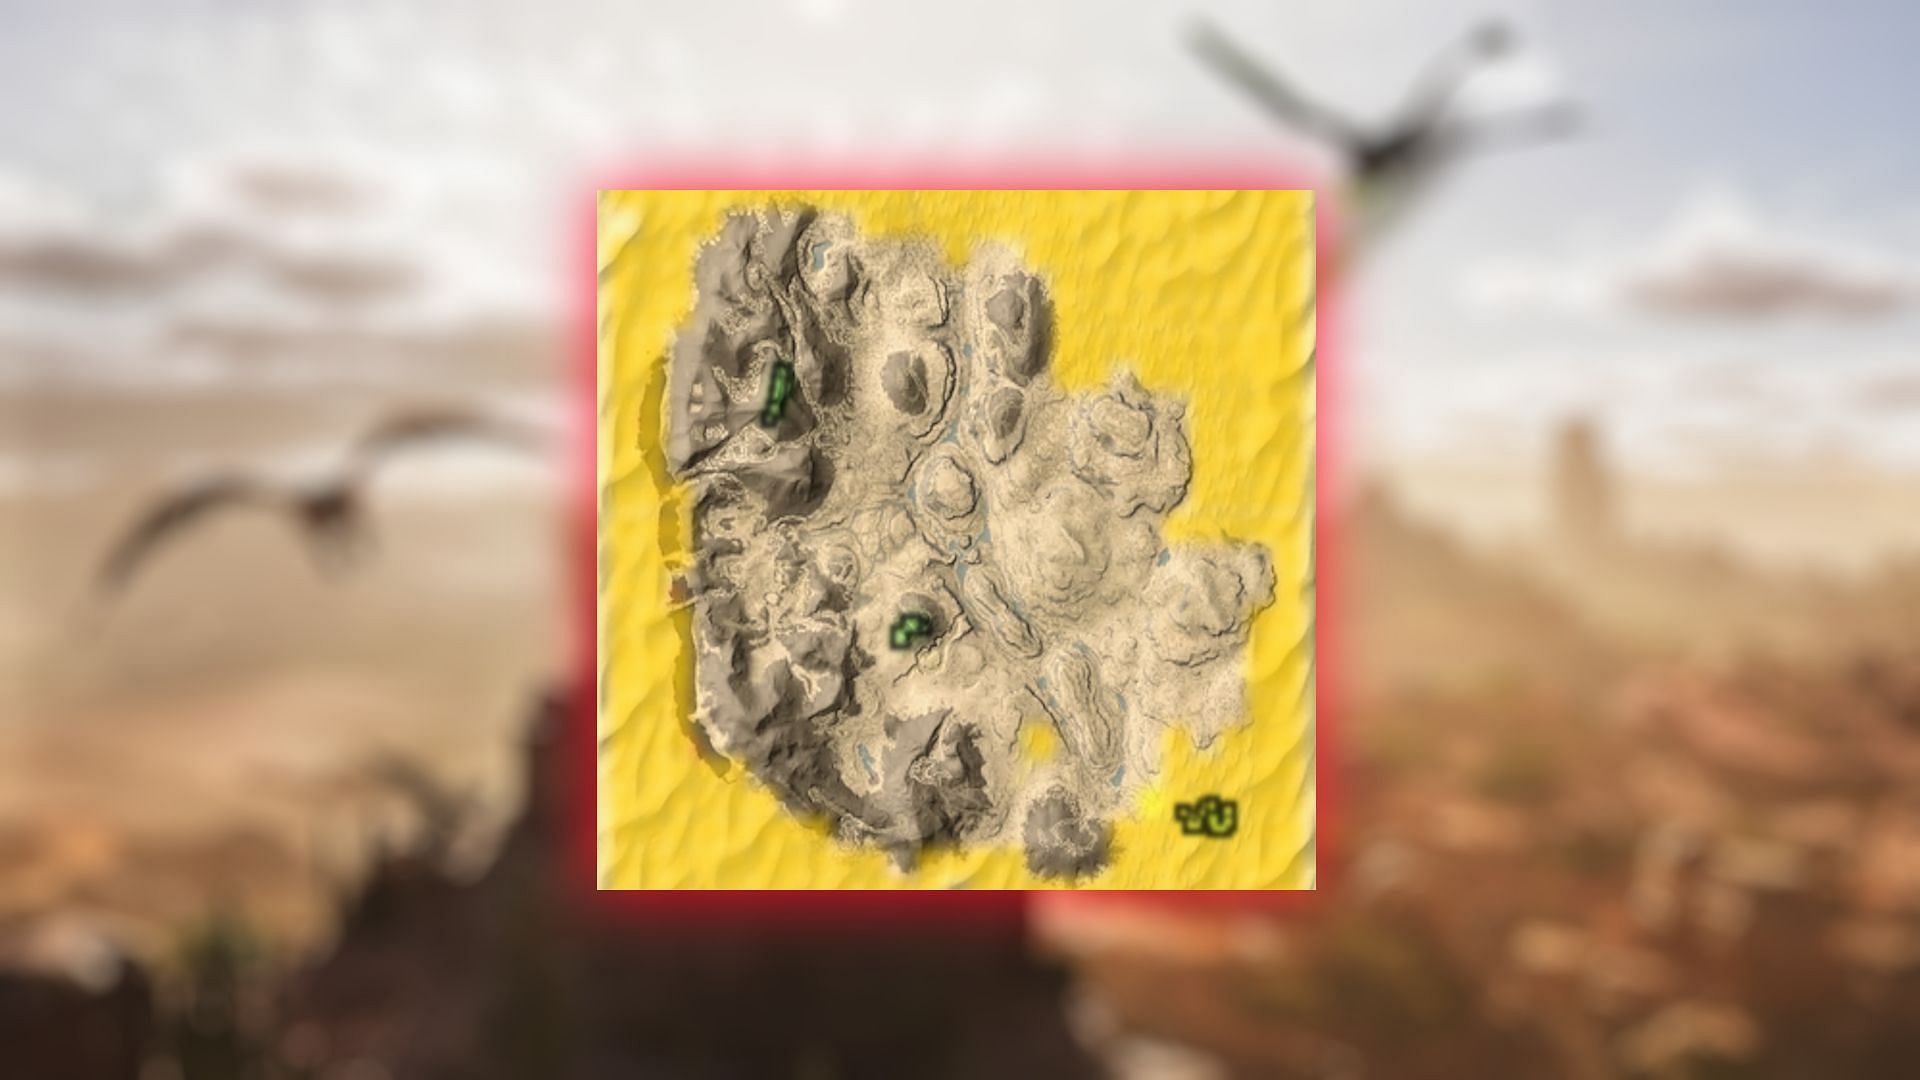 Mantis can be spotted around the desert map in Ark Survival Ascended (Image via Studio Wildcard)